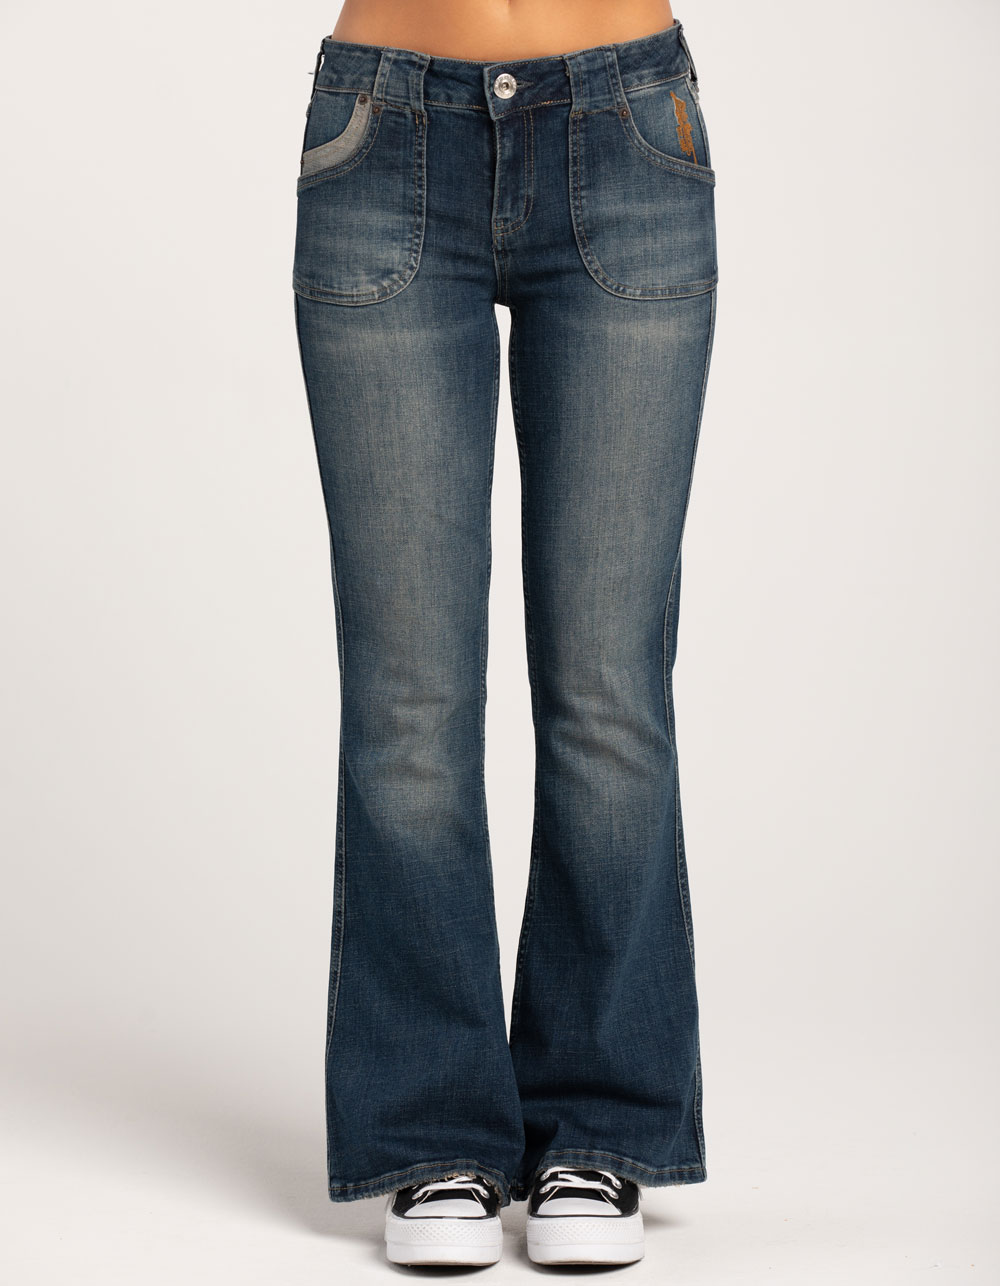 BDG '90s Low-Rise Flare Jean — Dark Wash  Low rise flare jeans, Low rise  jeans outfit, Flare jeans